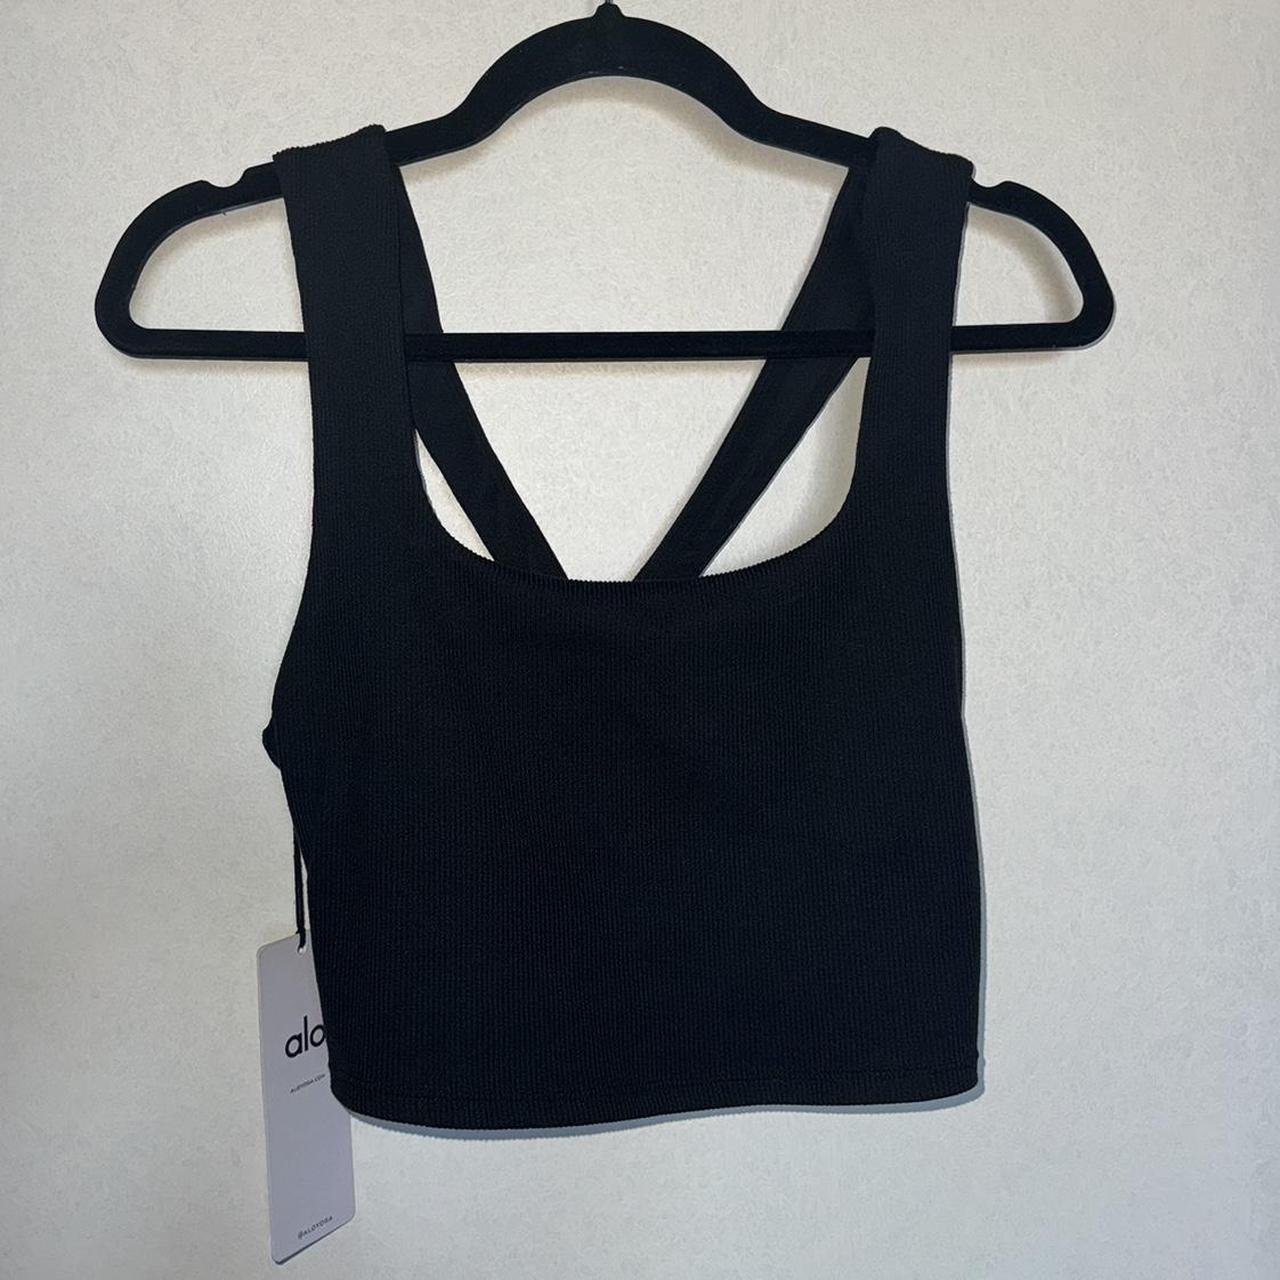 Alosoft ribbed chic bra tank features a - Depop